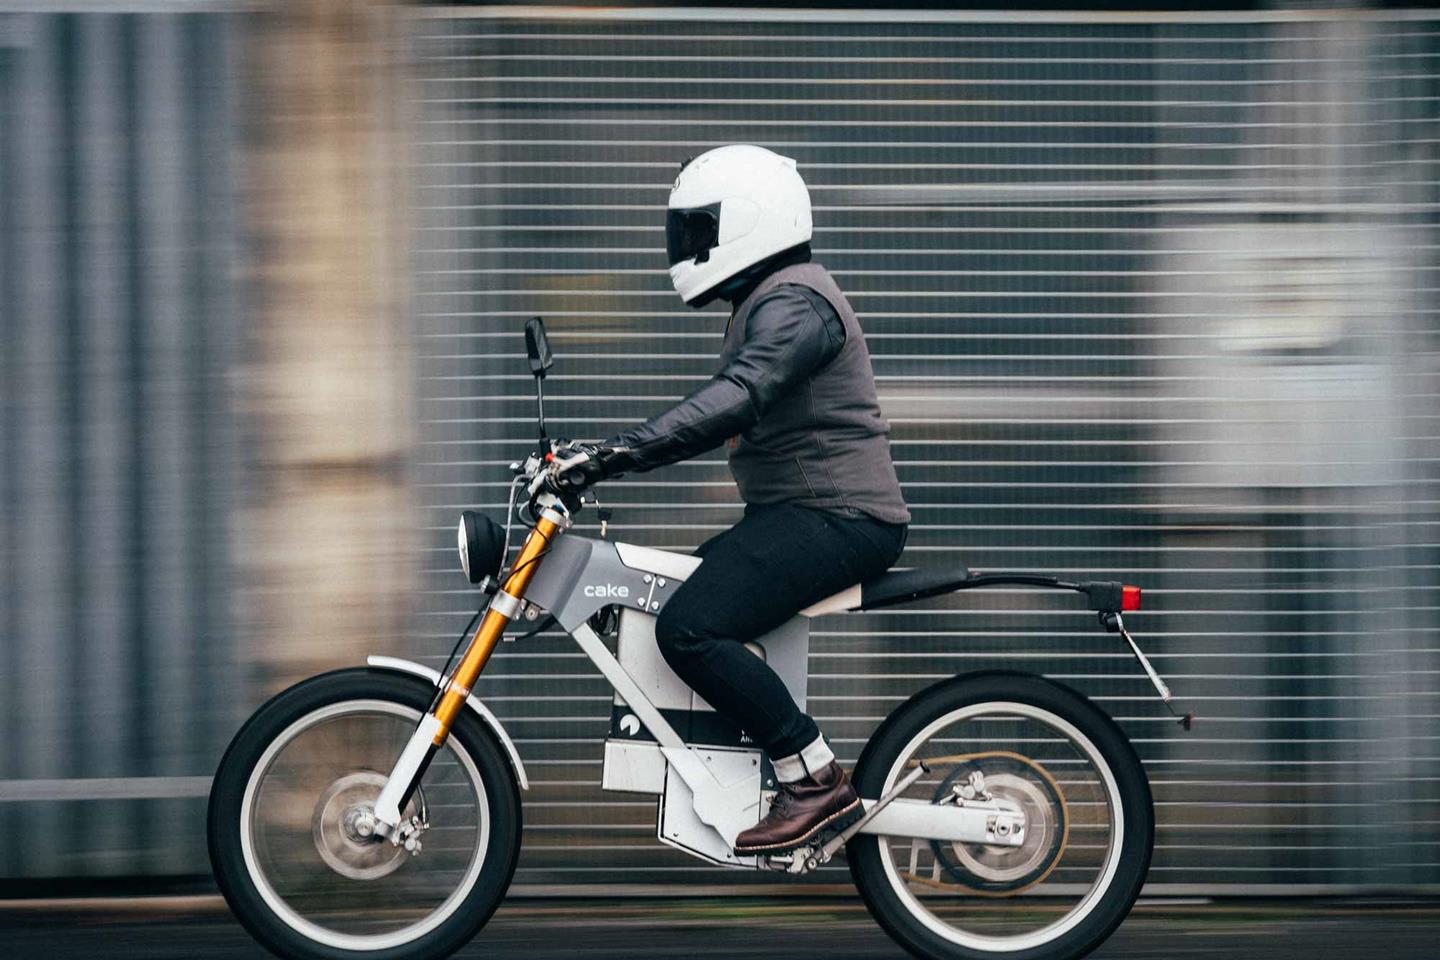 Swedish motorcycle company CAKE to roll out a new street legal electric bike  - iMotorbike News